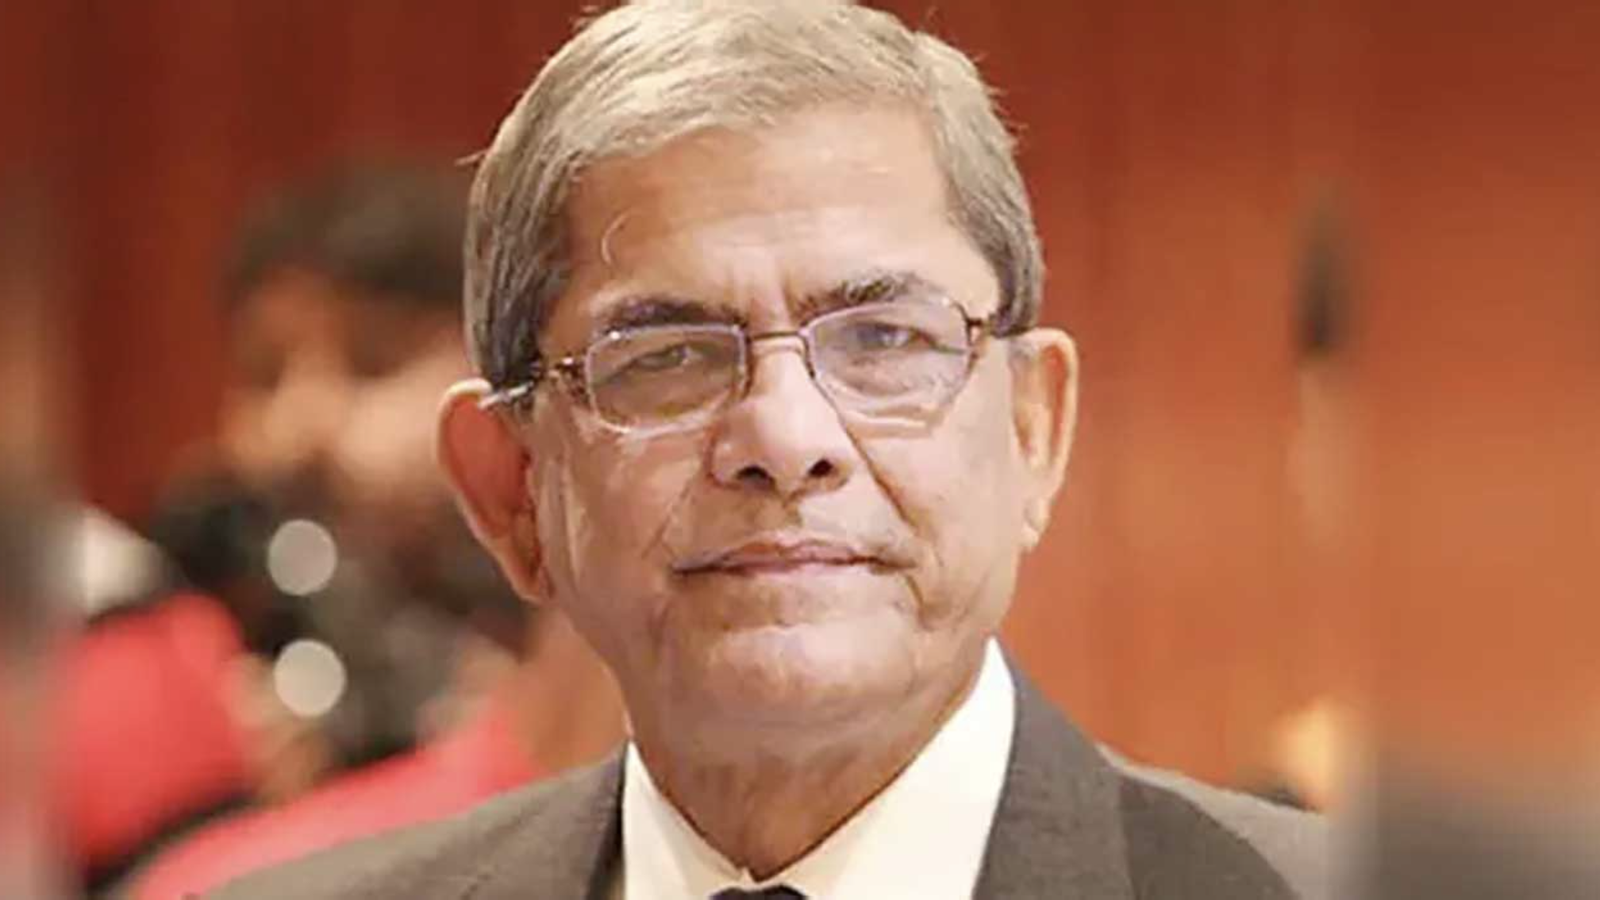 Road accidents have increased due to govt’s negligence: Mirza Fakhrul